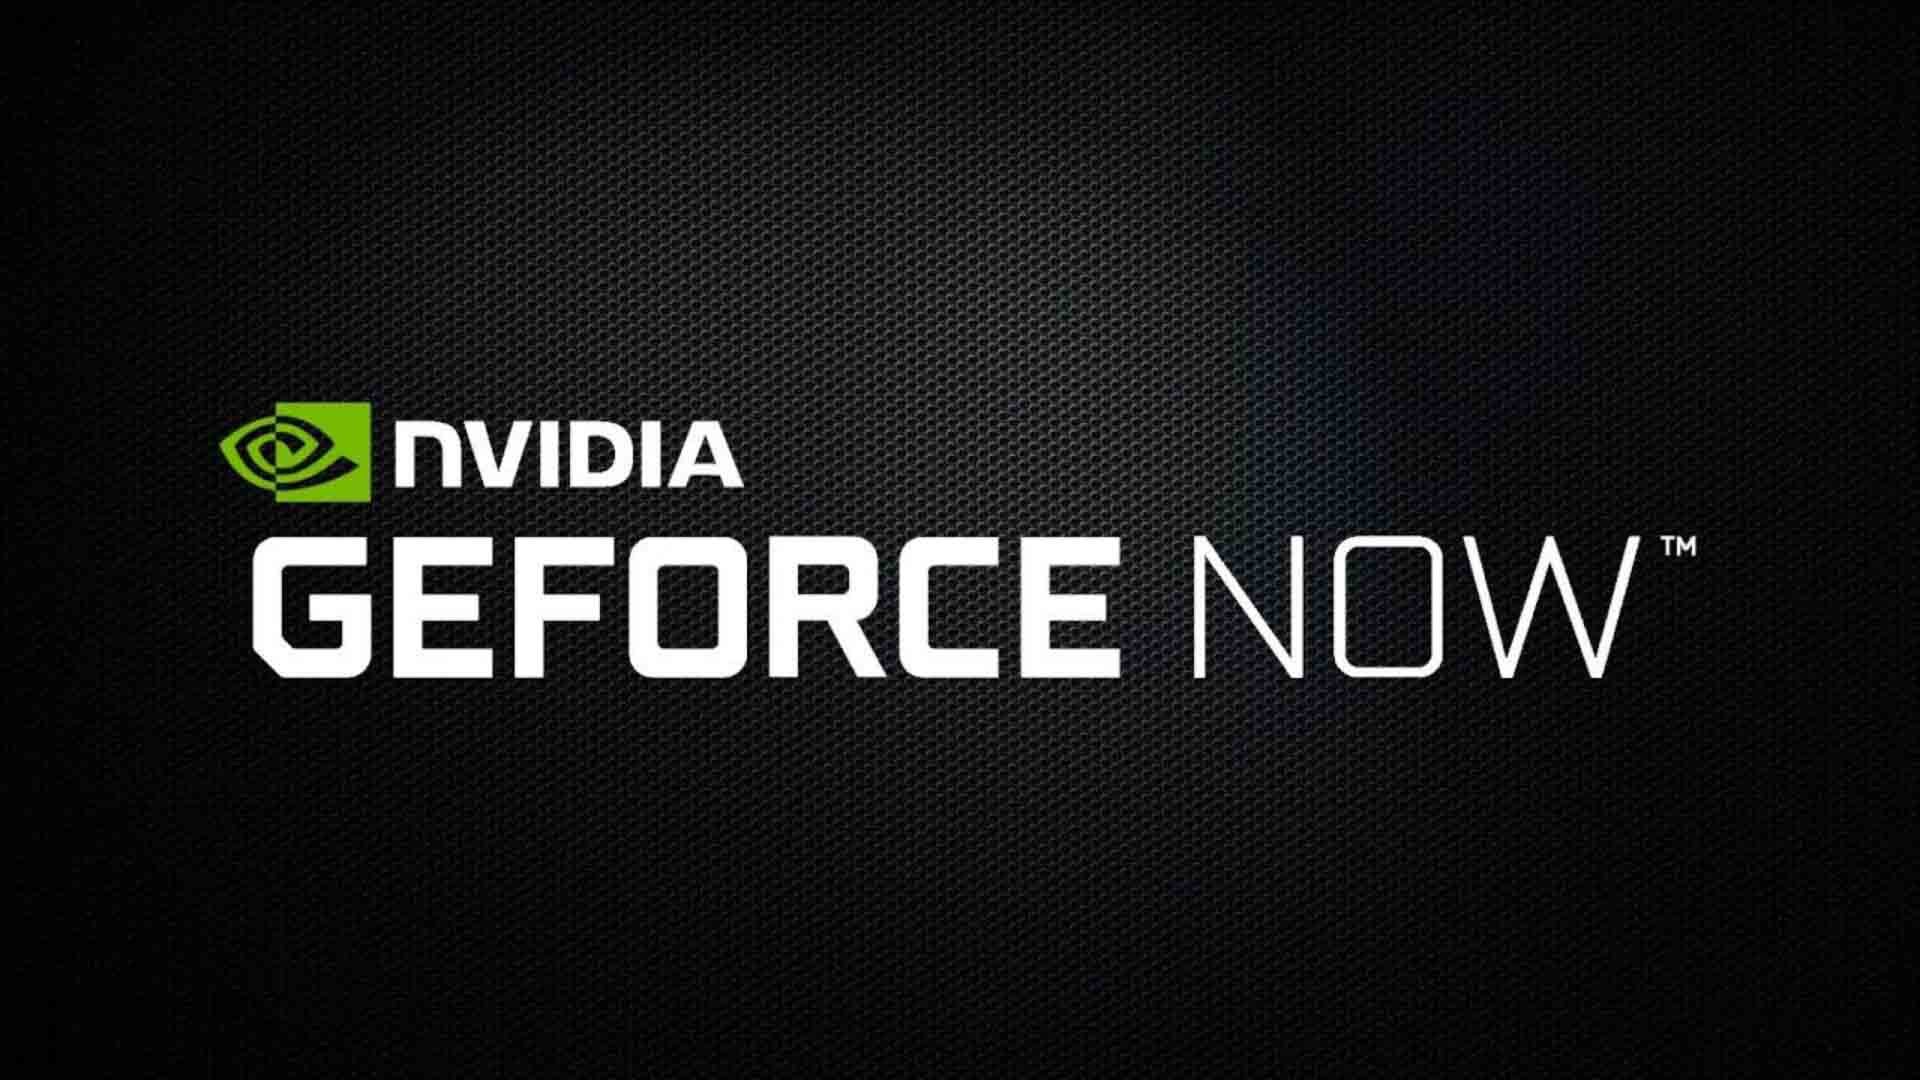 Lista de jogos do geforce now tem remakes e títulos inéditos | 1846f7ff geforce now | android, geforce now, multiplayer, nintendo, nvidia, pc, playstation, singleplayer, xbox | jogos do geforce now notícias